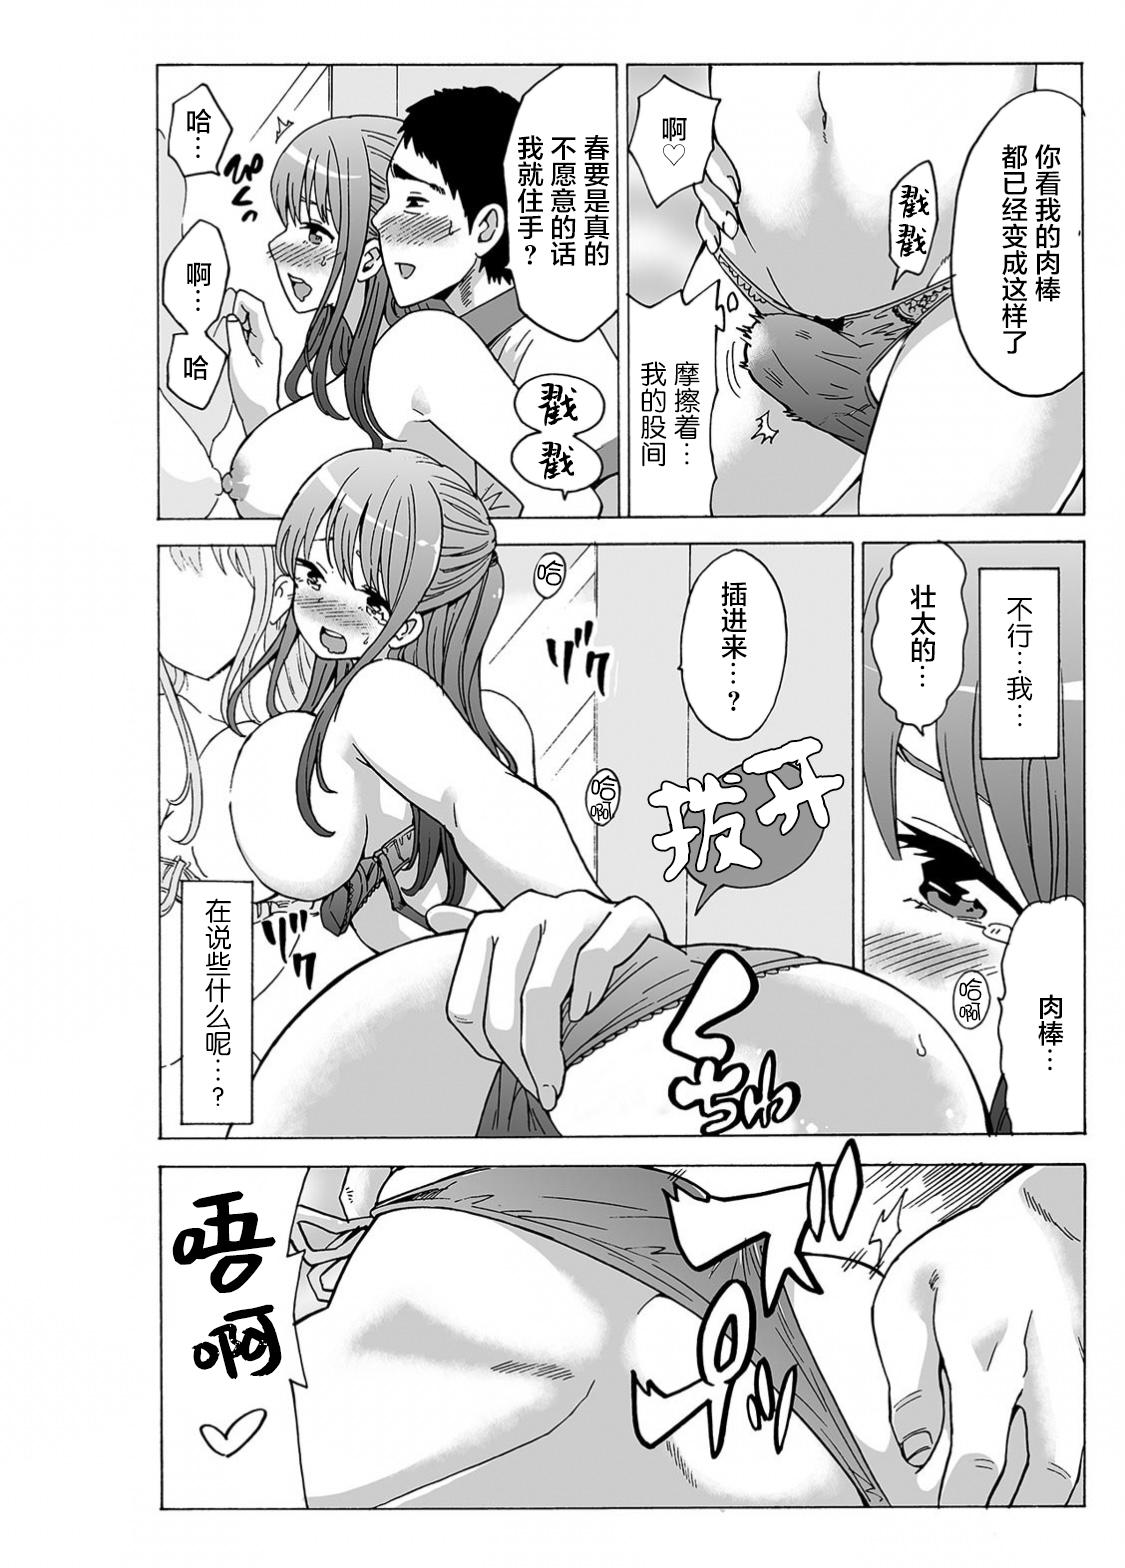 Sentando [Motaro / Akahige] My first partner is ... my father-in-law!? 2 [Chinese] Gay 3some - Page 8